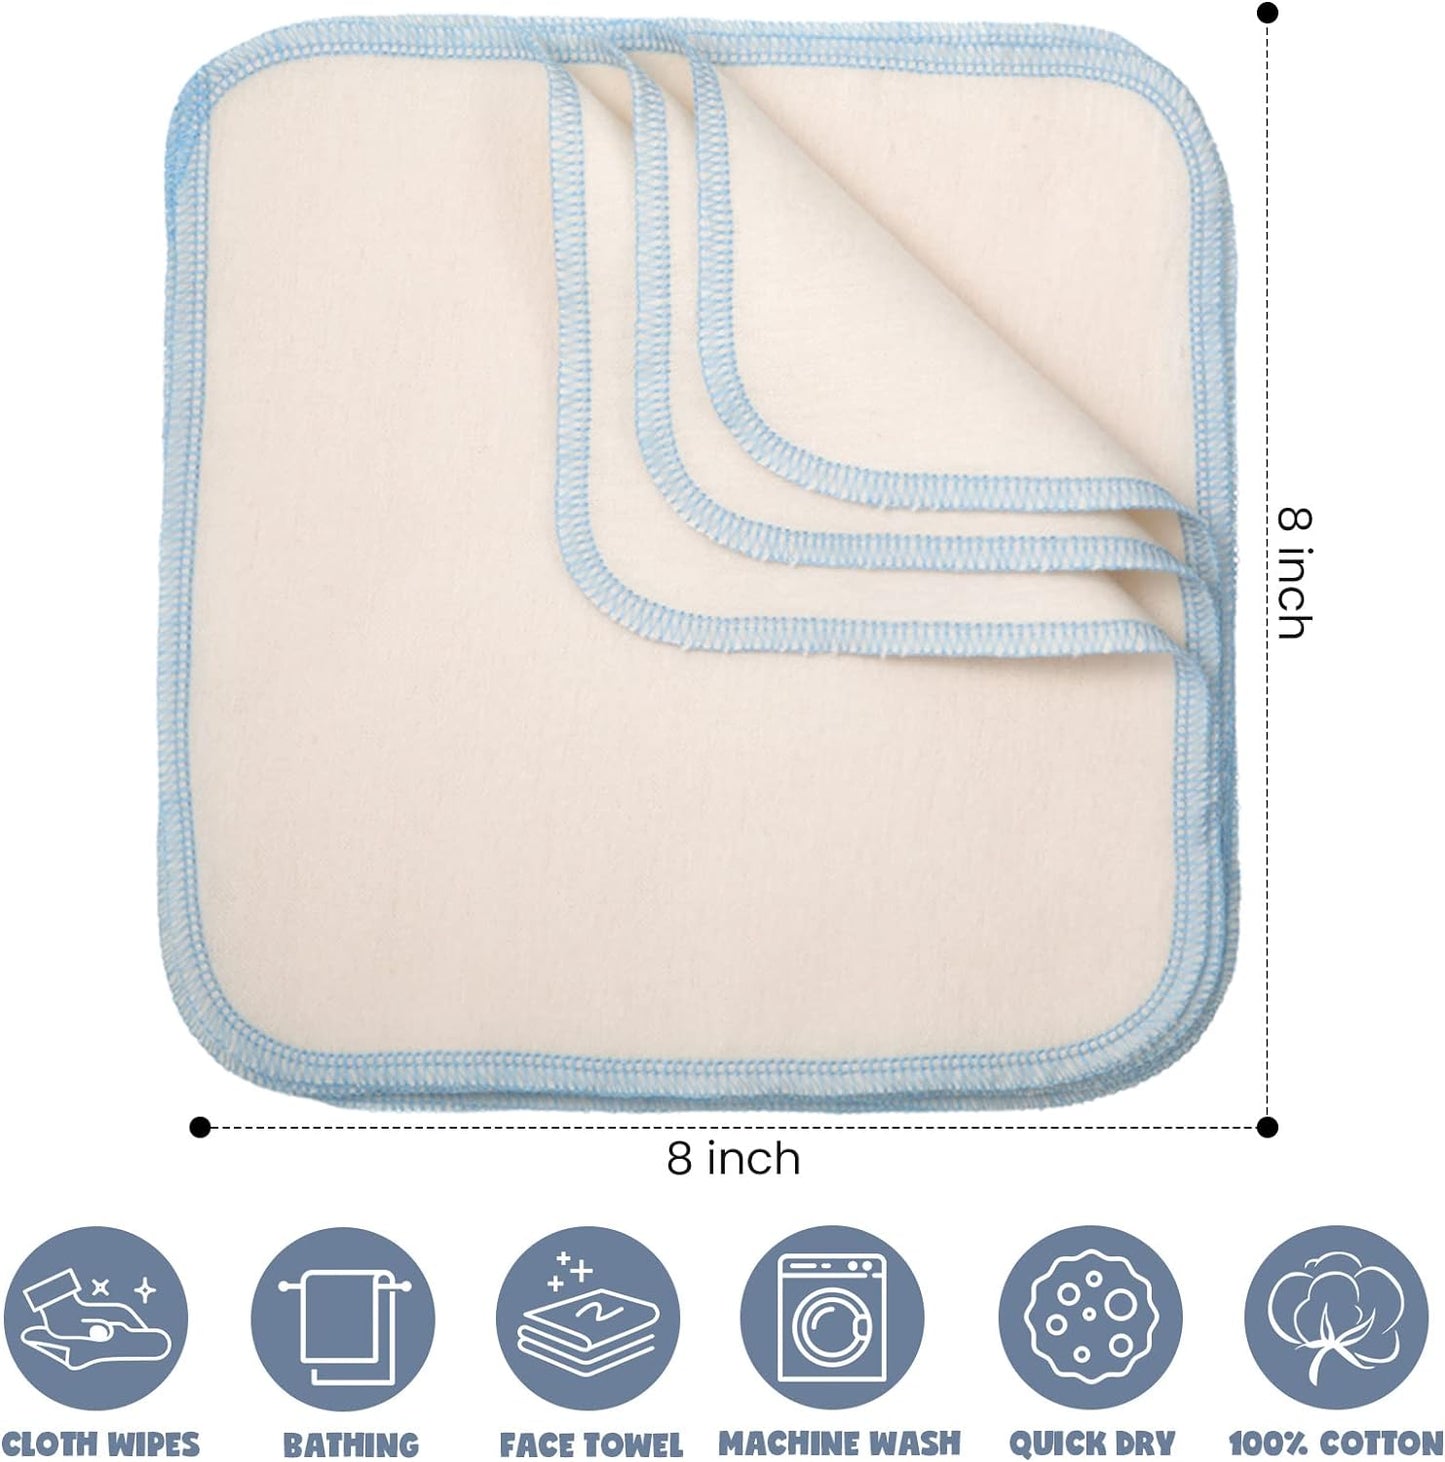 Mimorou 45 Pcs Flannel Cloth Baby Wipes Reusable Baby Diapers Wipes Washable Natural Unbleached Baby Face Wipes Soft and Sturdy Cloth Wipes 5 Colors Outer Stitching 8 x 8 Inches, 1.0 Count